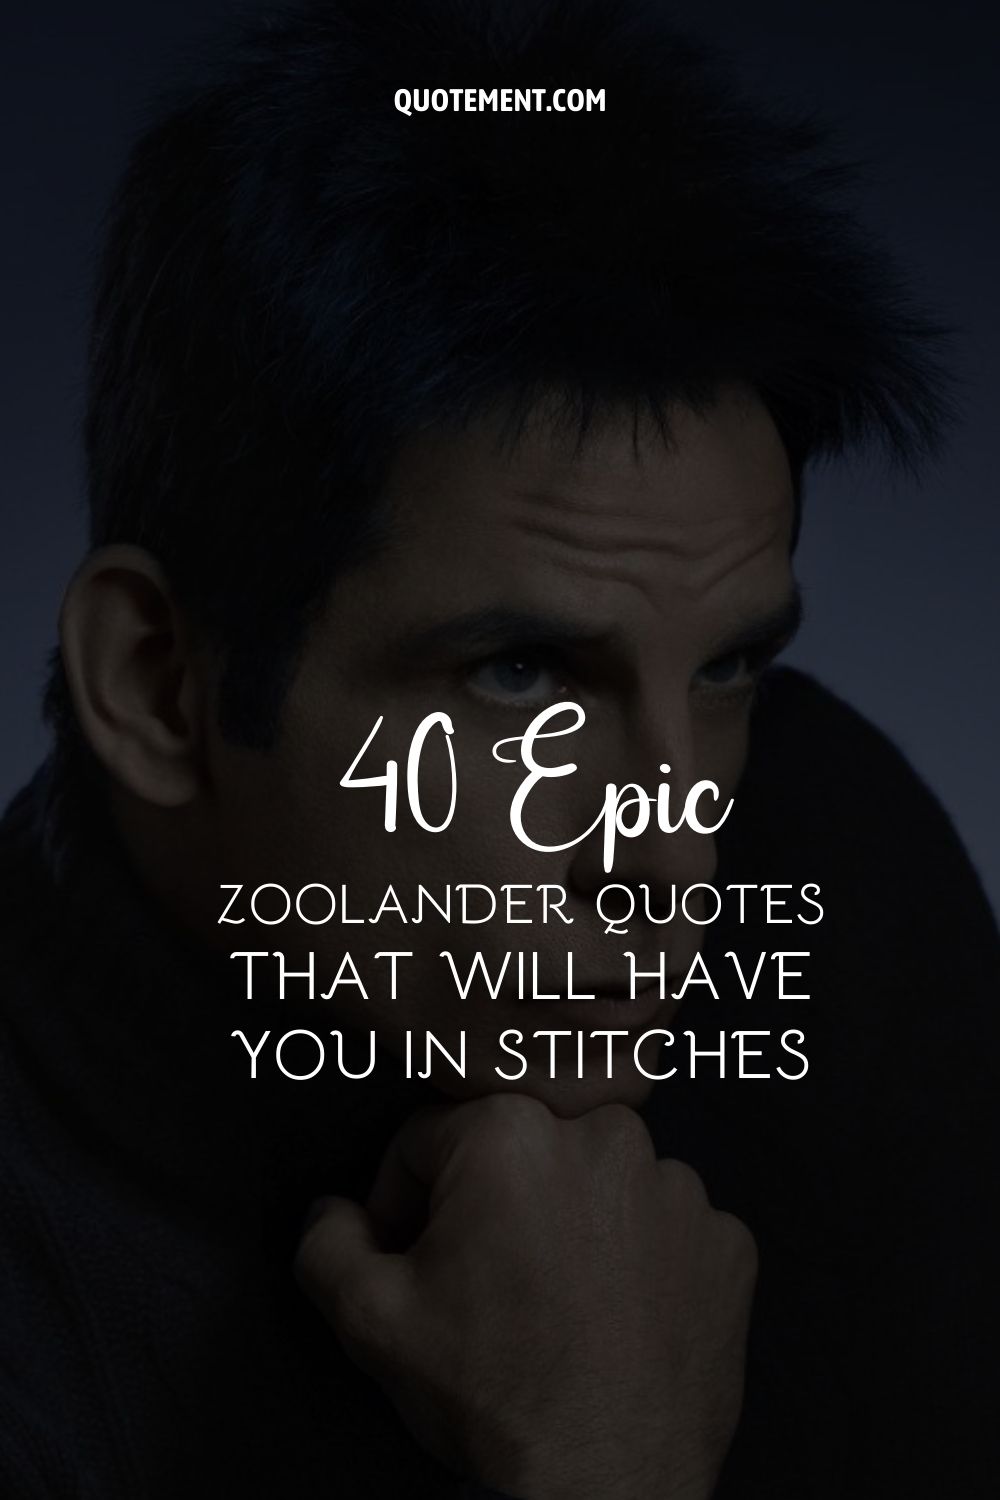 40 Epic Zoolander Quotes That Will Have You In Stitches
